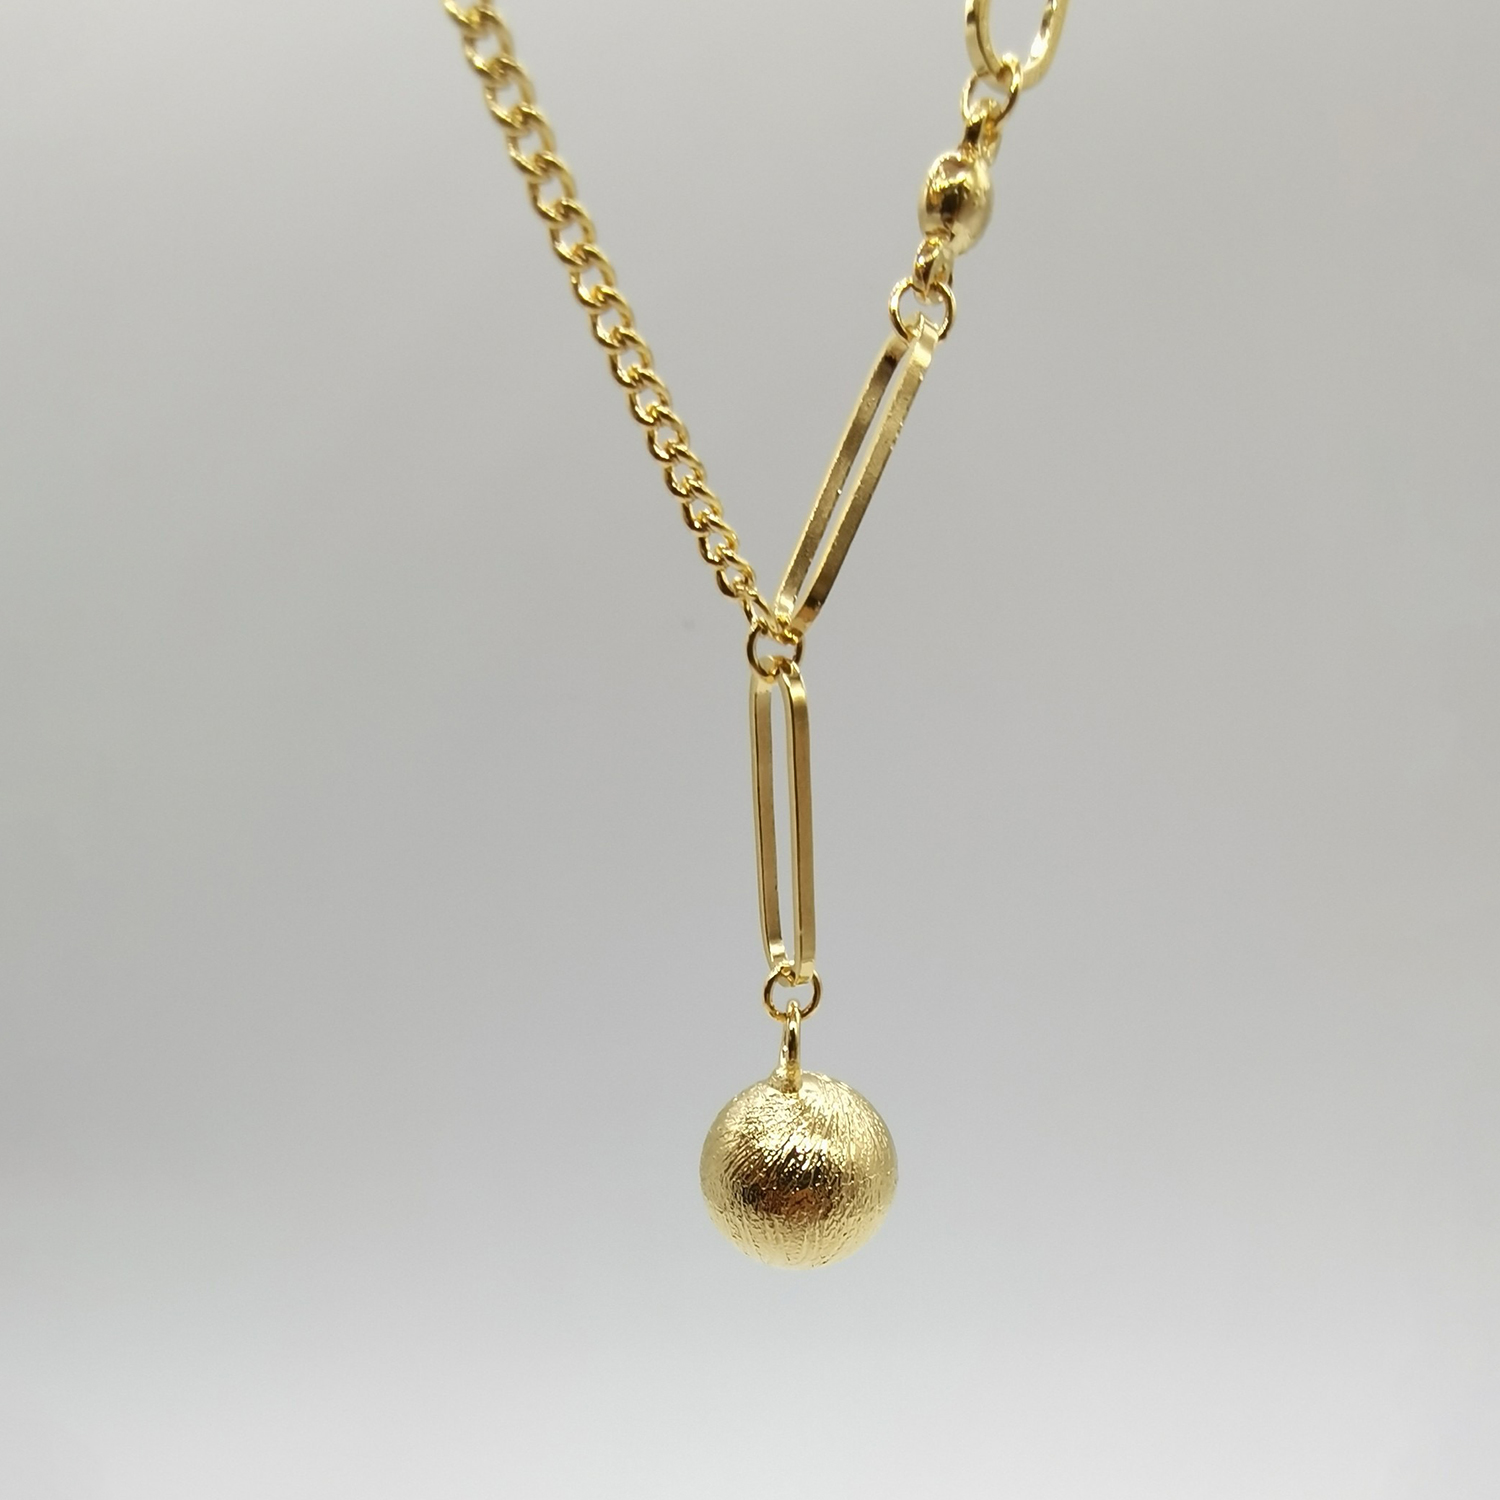 Alluvial gold vacuum electroplating 24K gold AB chain small ball necklace